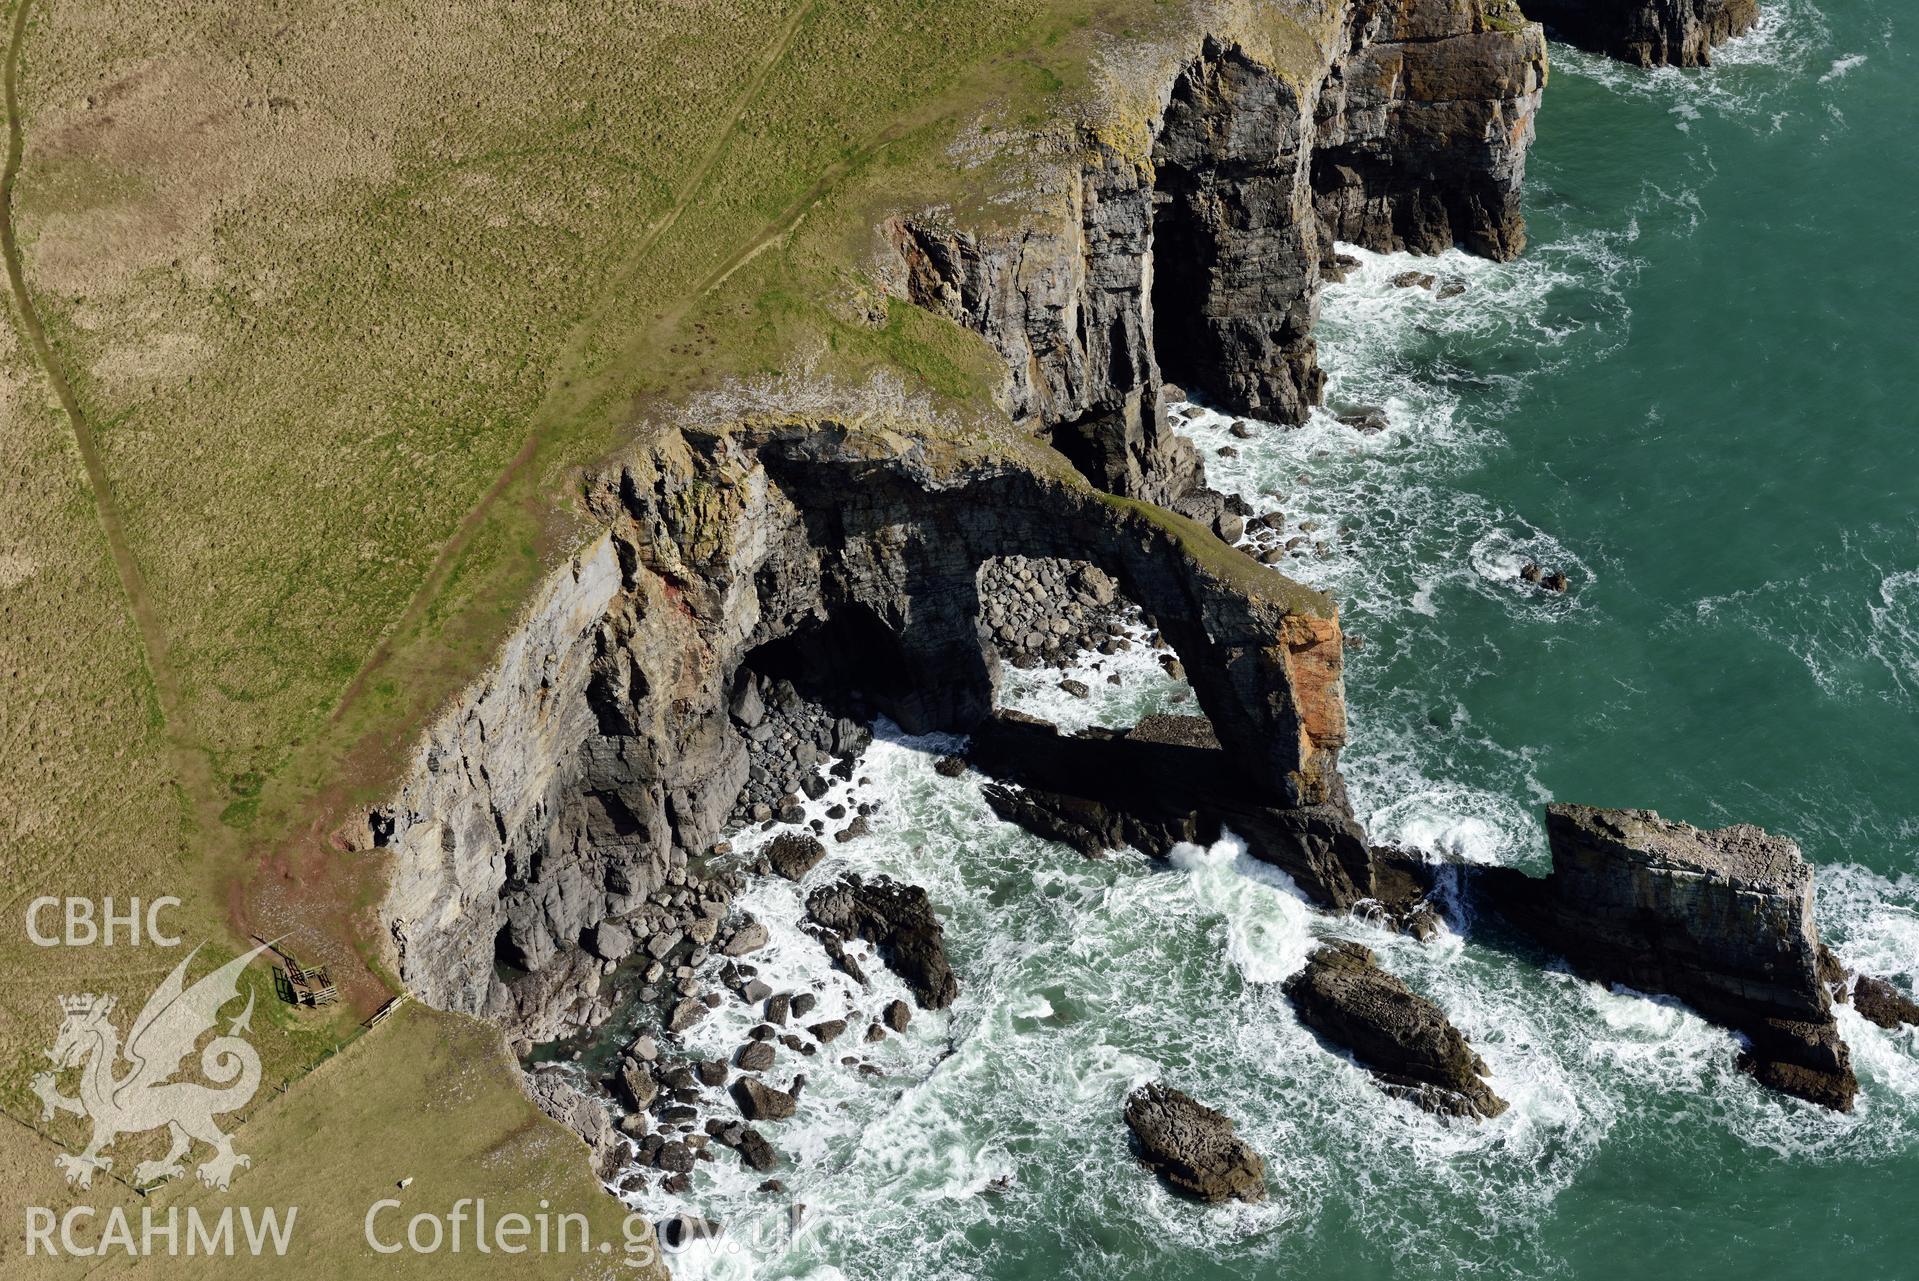 The Green Bridge of Wales, following the October 2017 partial collapse. Baseline aerial reconnaissance survey for the CHERISH Project. ? Crown: CHERISH PROJECT 2018. Produced with EU funds through the Ireland Wales Co-operation Programme 2014-2020. All material made freely available through the Open Government Licence.